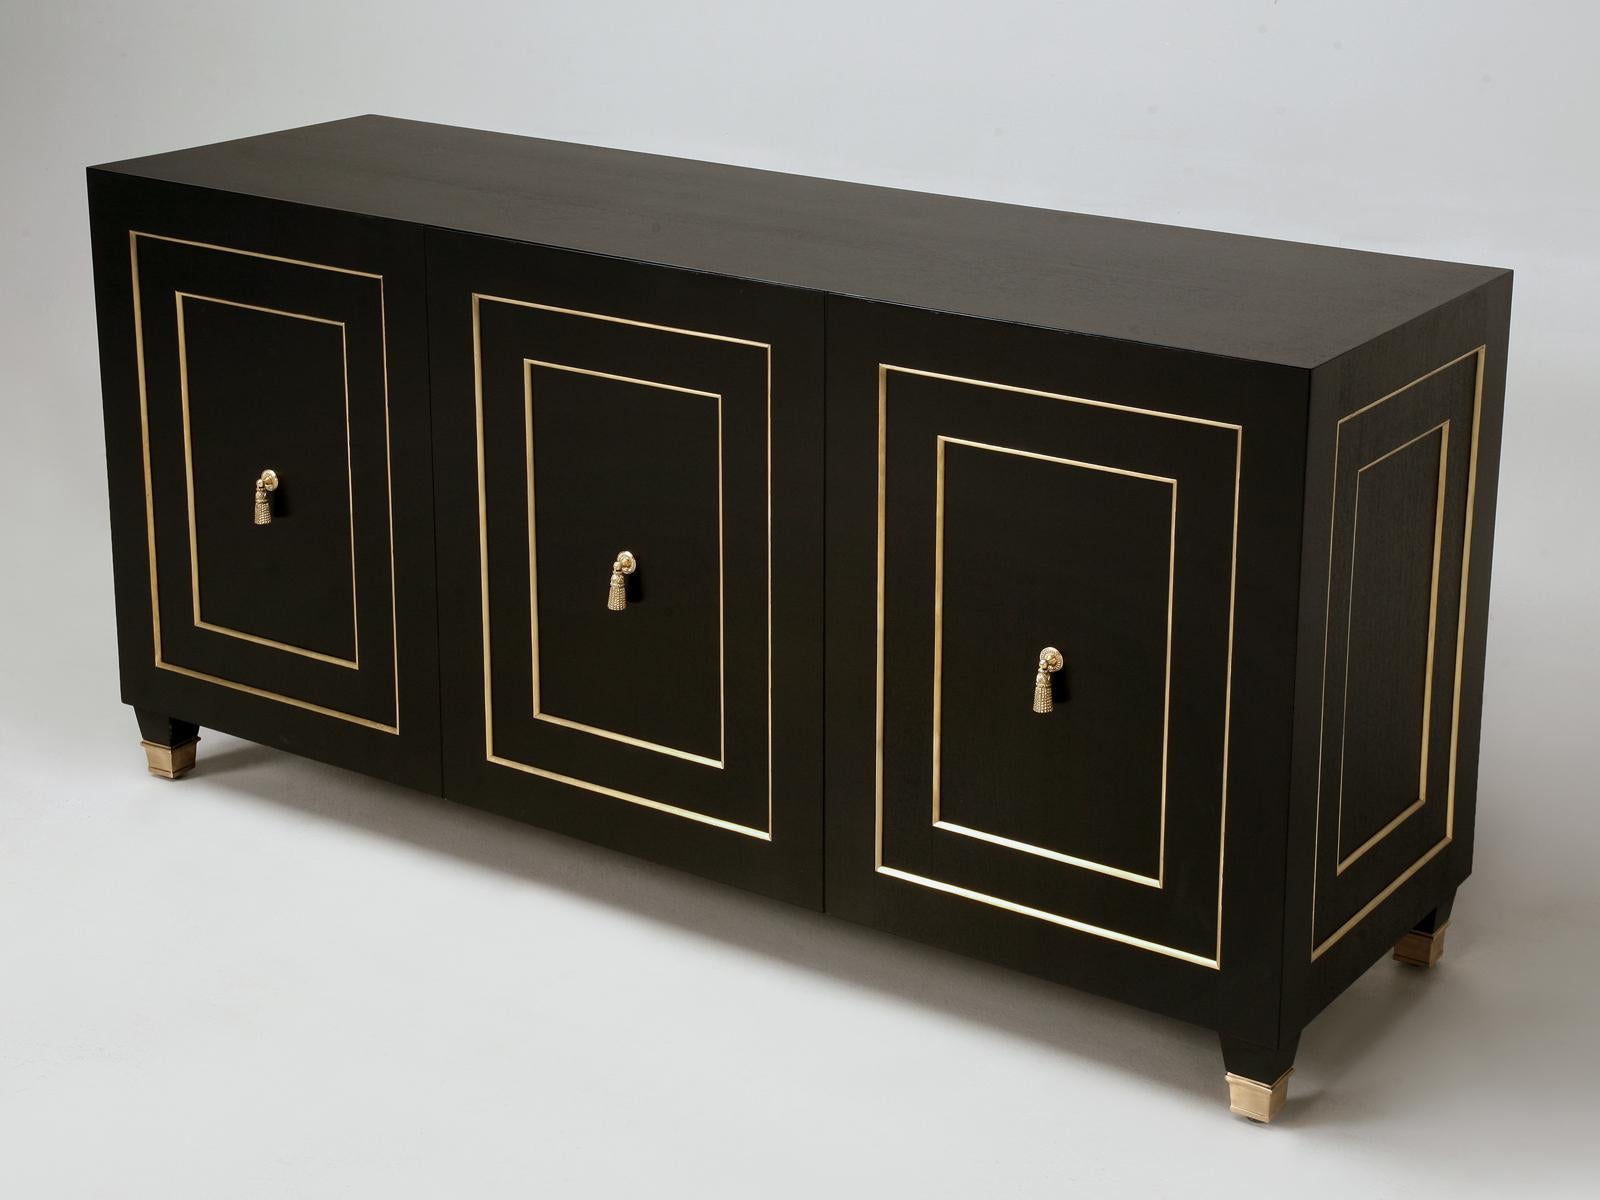 Louis XVI Style with a slight Mid-Century Modern twist. Our Old Plank buffet is made inhouse in our Chicago workshop and is available in virtually any dimension or finish you chose. Shown, is an ebonized mahogany with solid bronze trim and a Louis